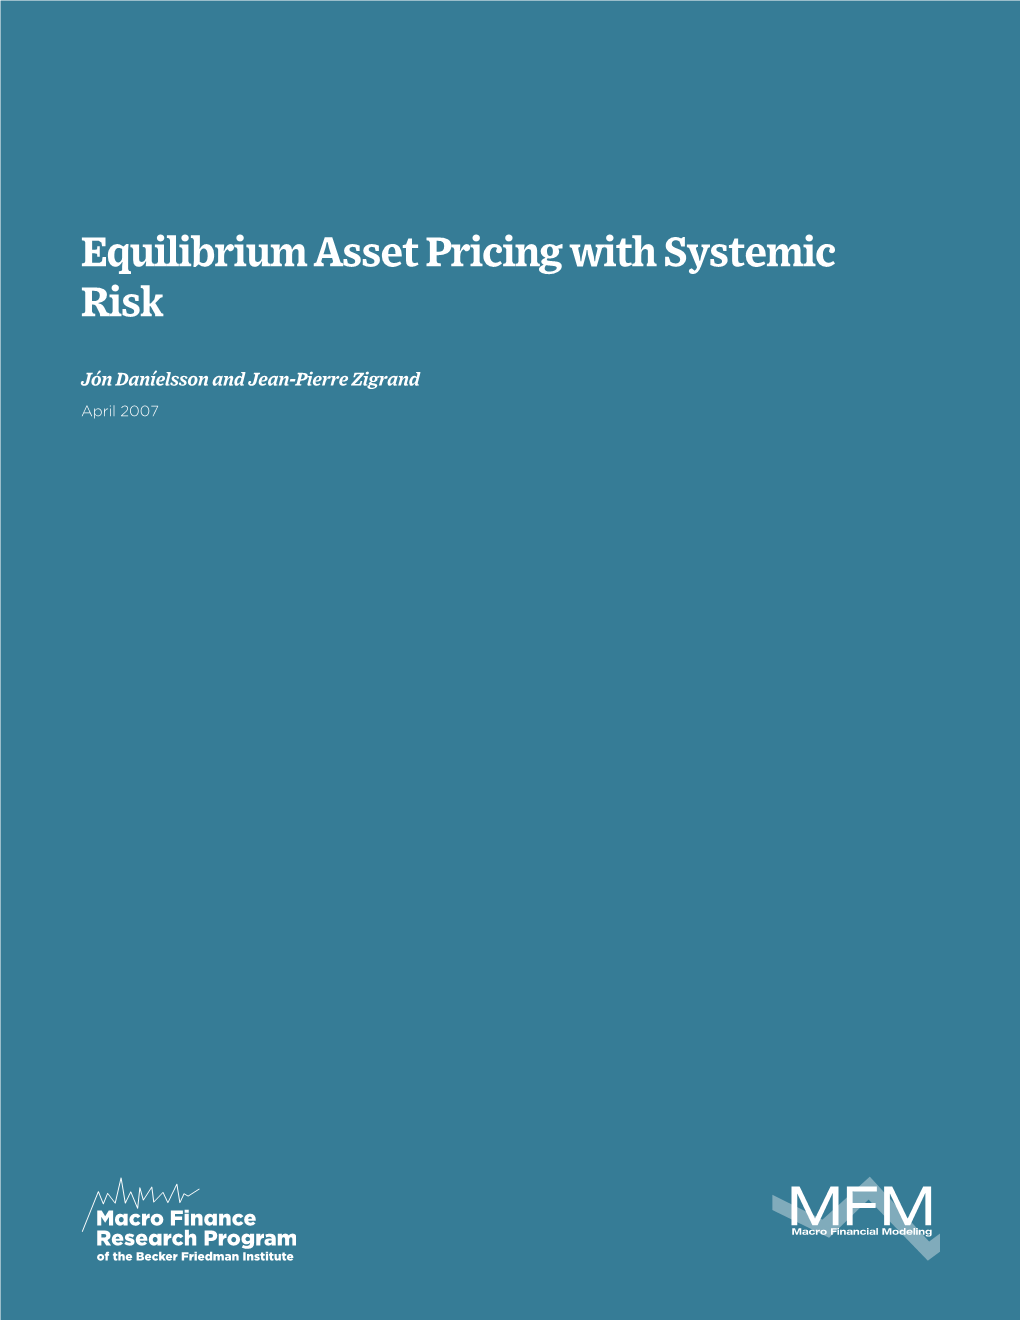 Equilibrium Asset Pricing with Systemic Risk